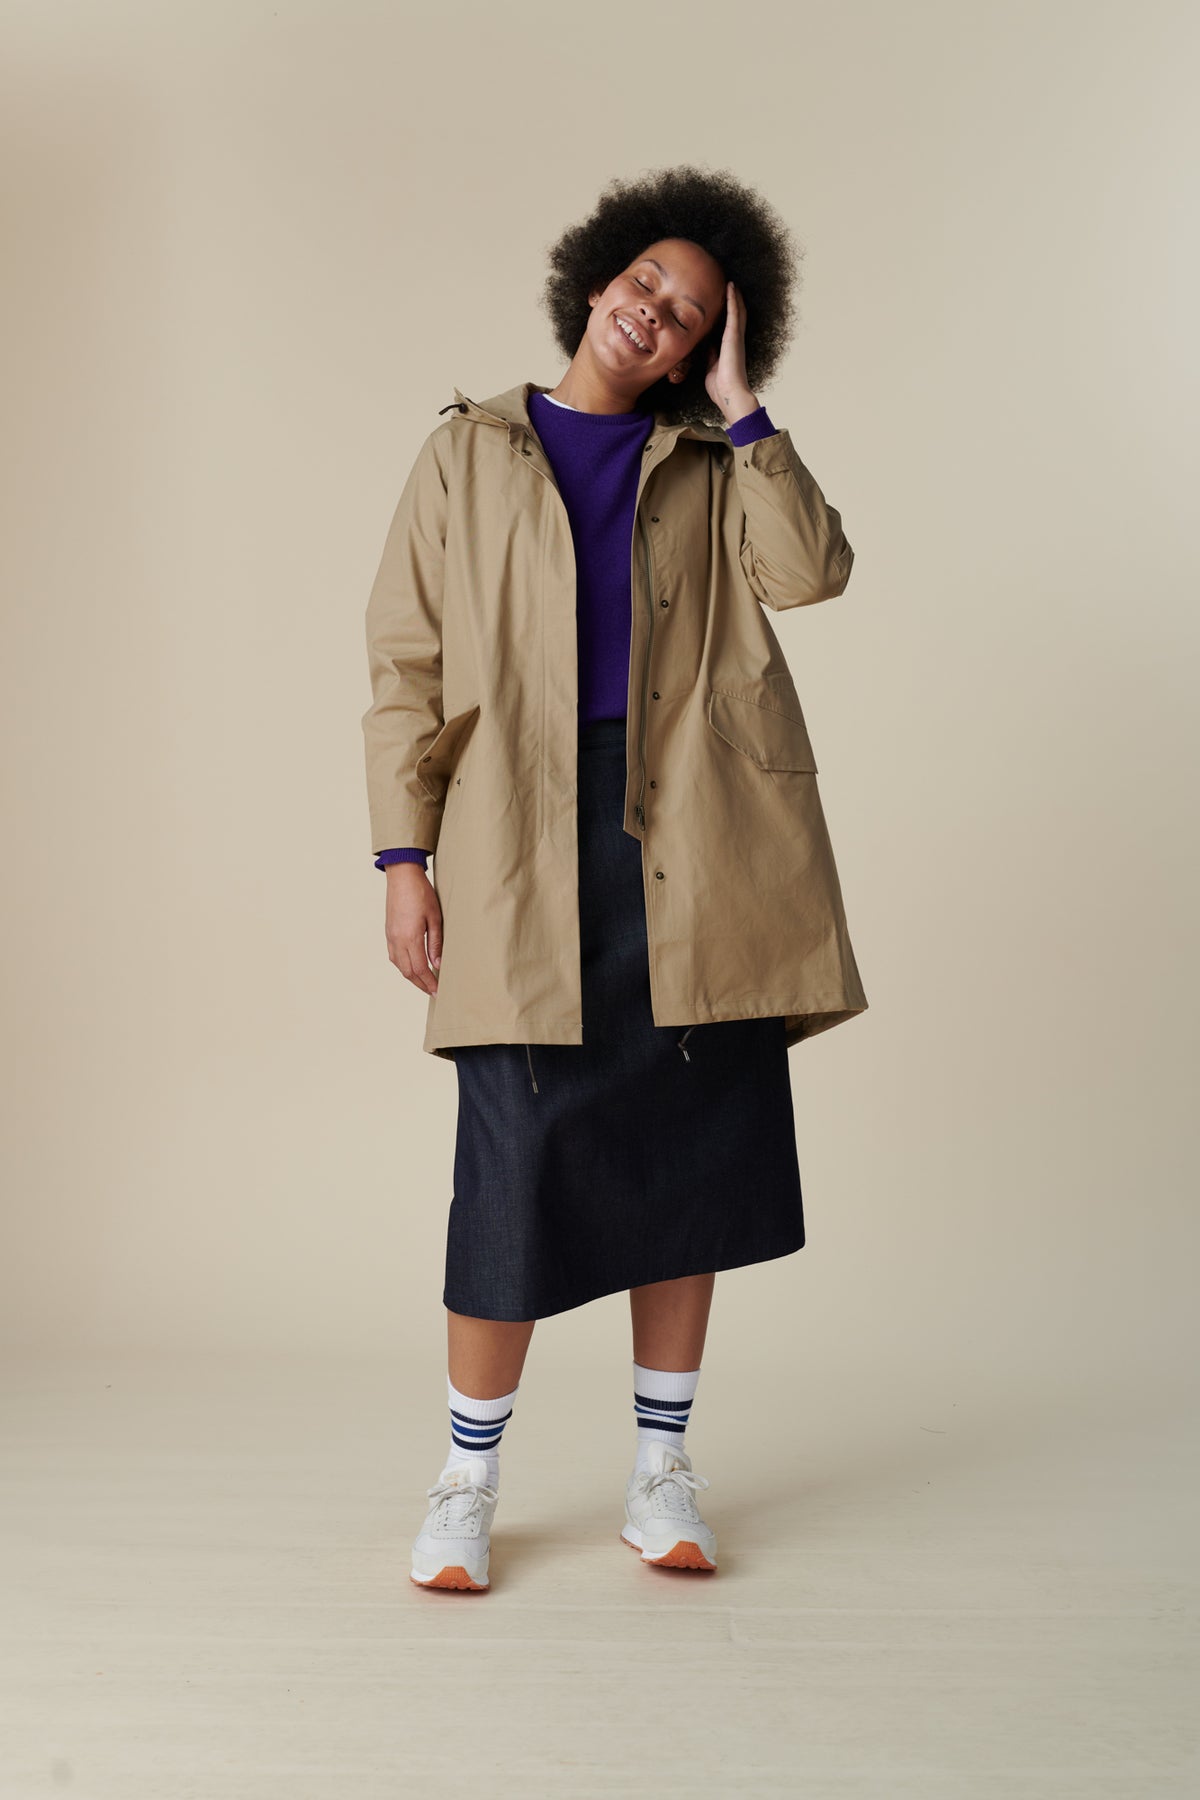 
            Front shot of a young, black female model with dark hair wearing long stone coloured parka. The parka is styled with lambswool crew neck in dark purple and midi skirt in indigo with white Walsh trainer.